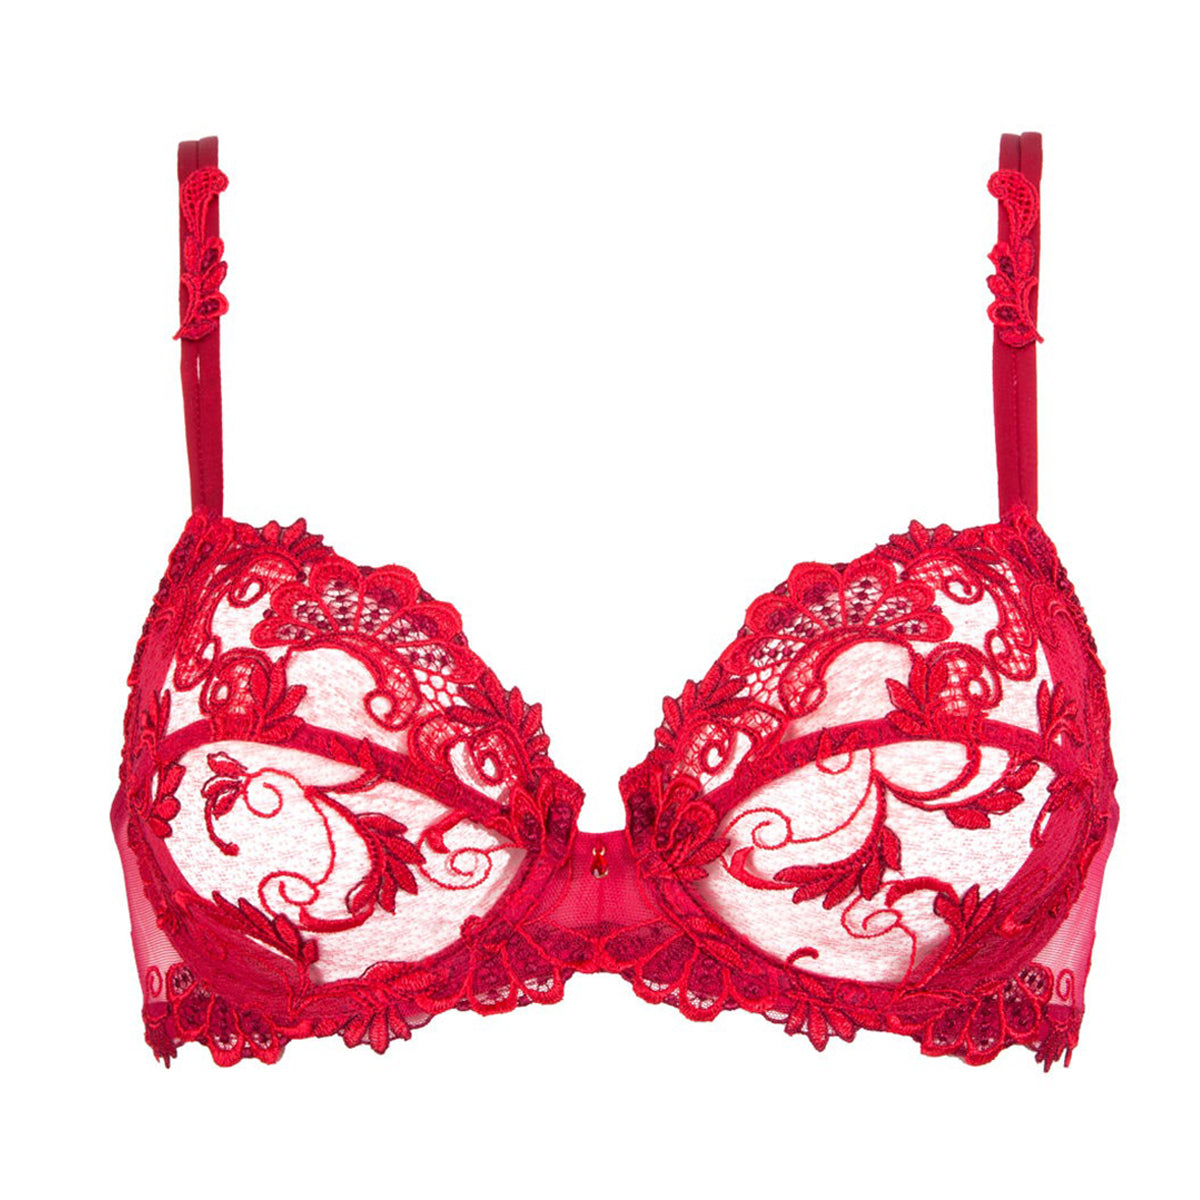 Shop for J CUP, Red, Lingerie